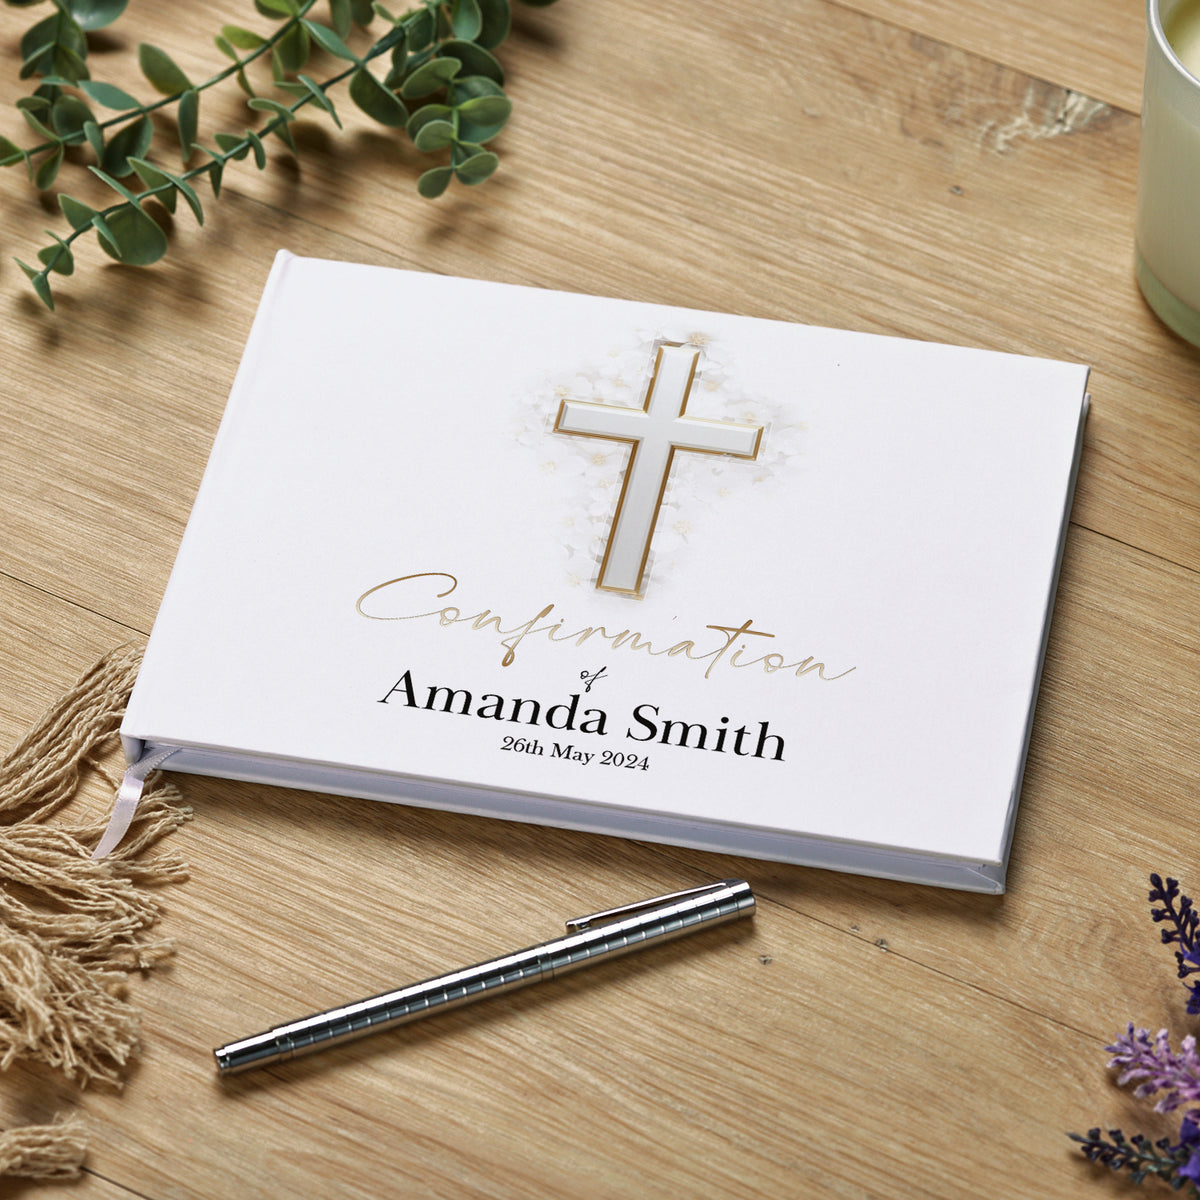 Personalised Confirmation Guest Book With Silver Cross